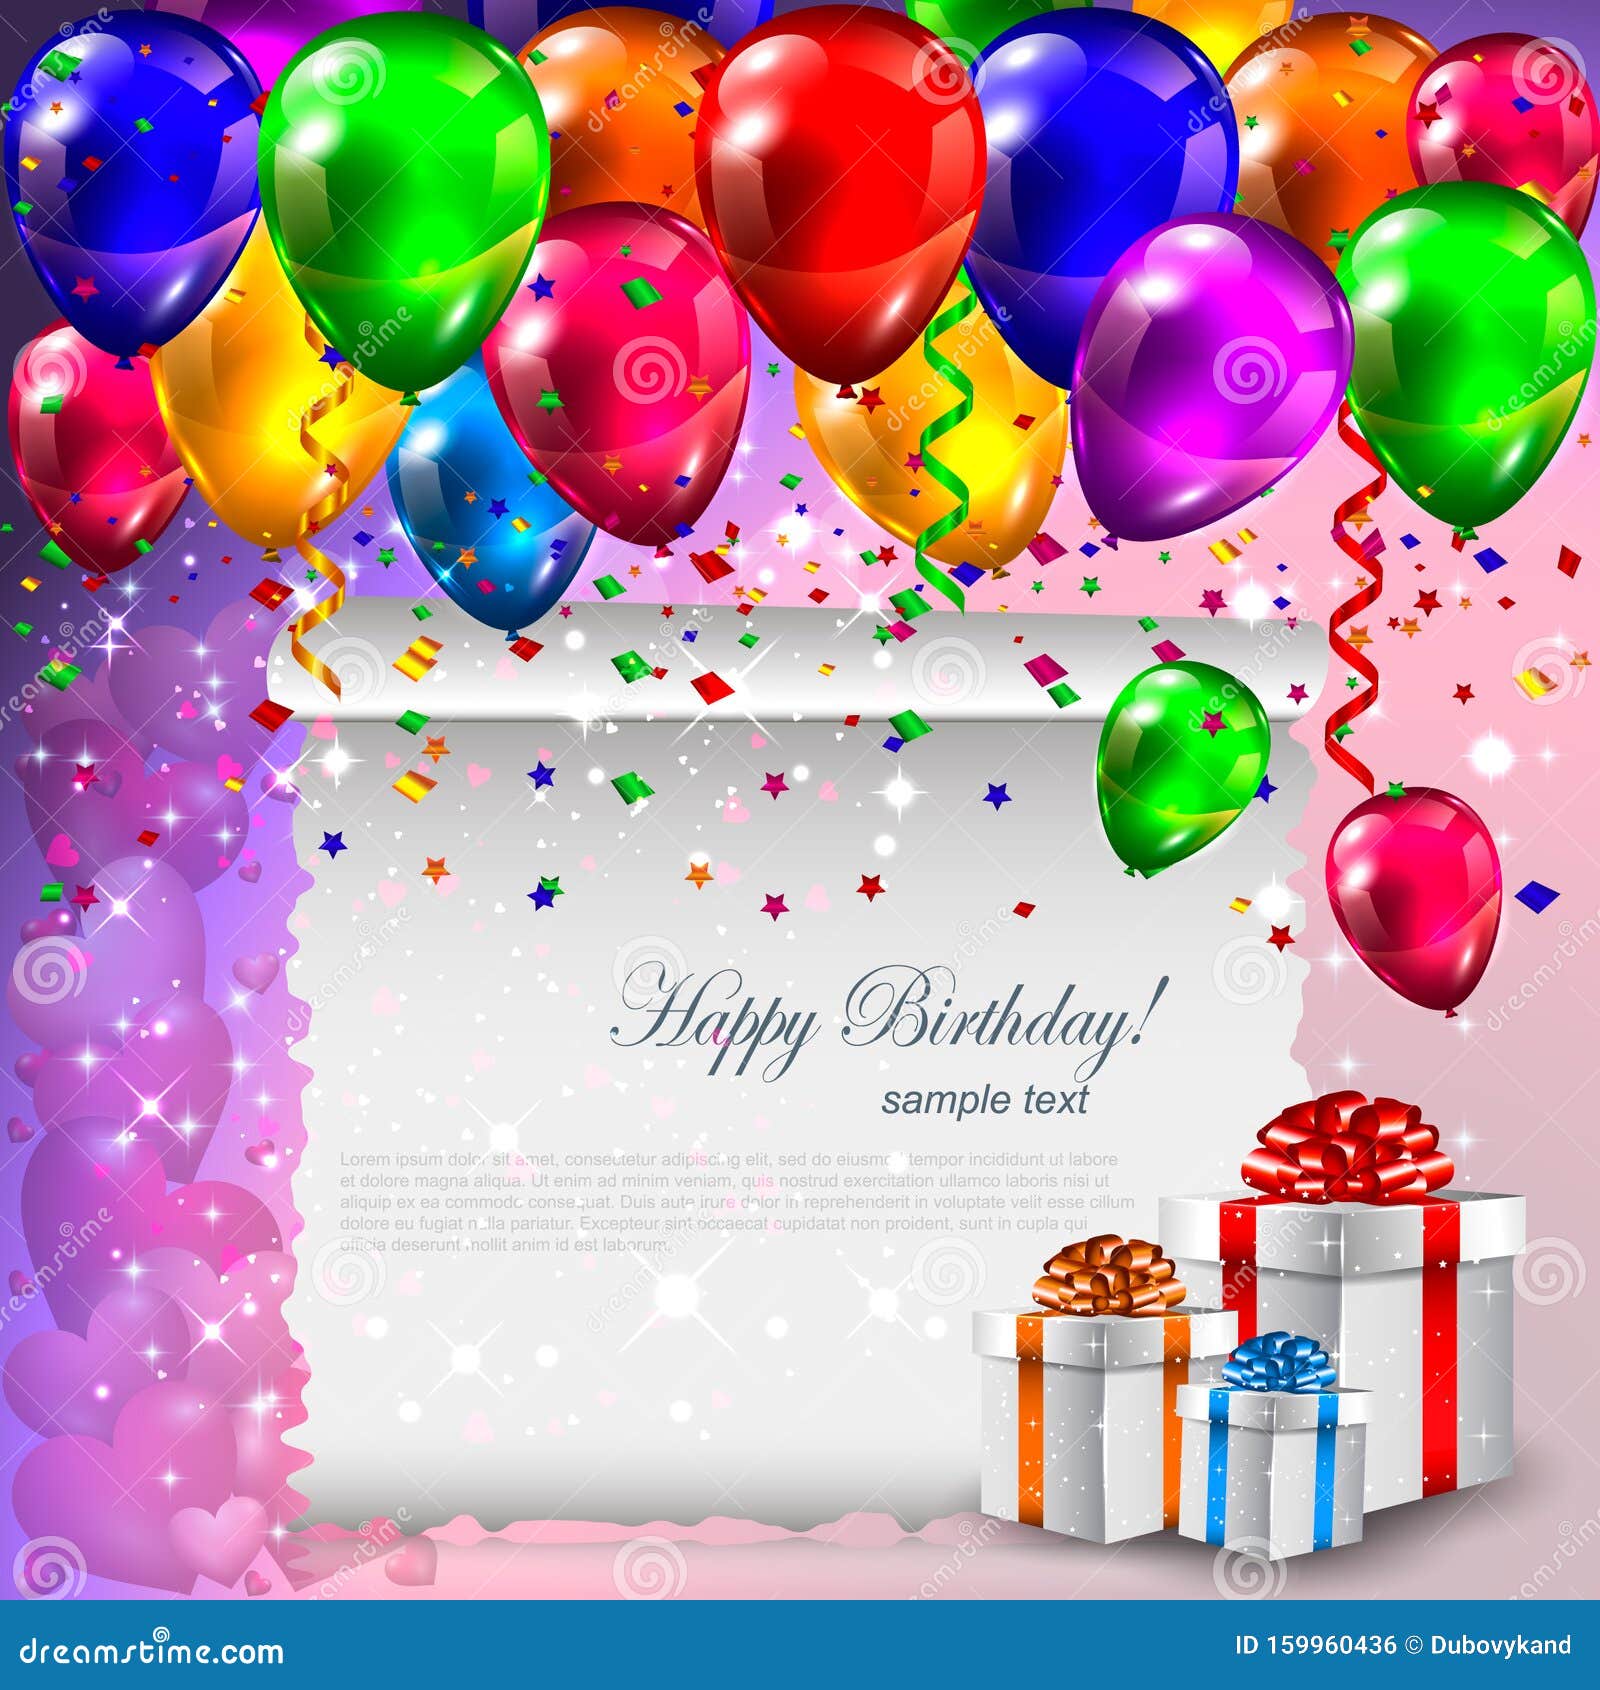 Beautiful Birthday Background with Present Boxes & Air Balloons Stock ...